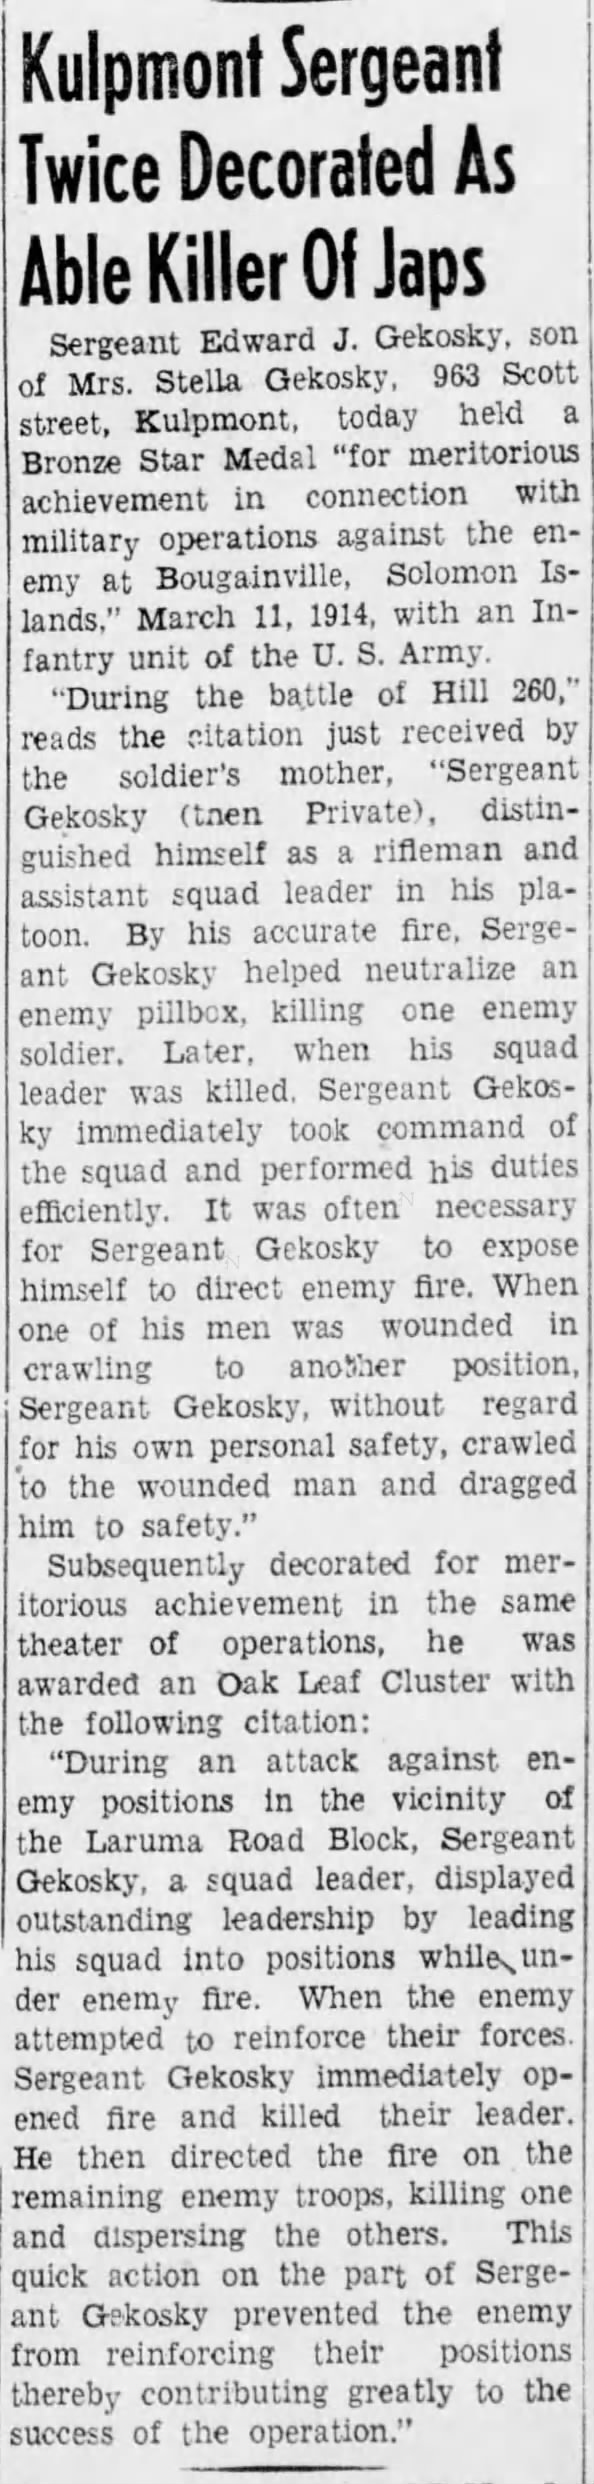 An article about Grandfather Edward Gekosky in WWII South Pacific [Mount Carmel newspaper]